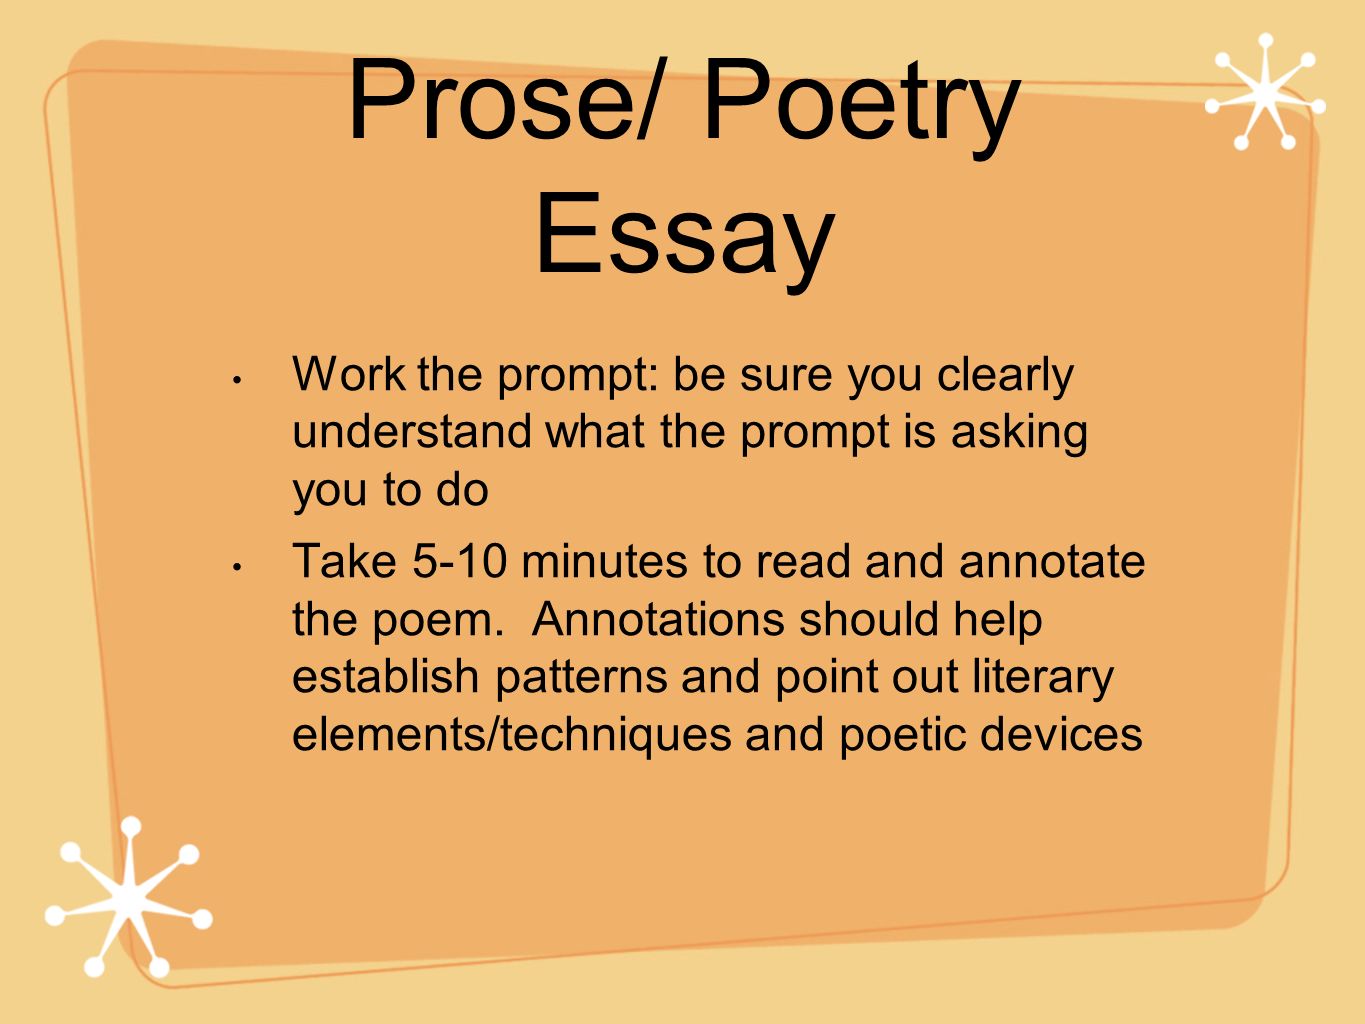 How to Approach AP Lit. Essays - ppt video online download